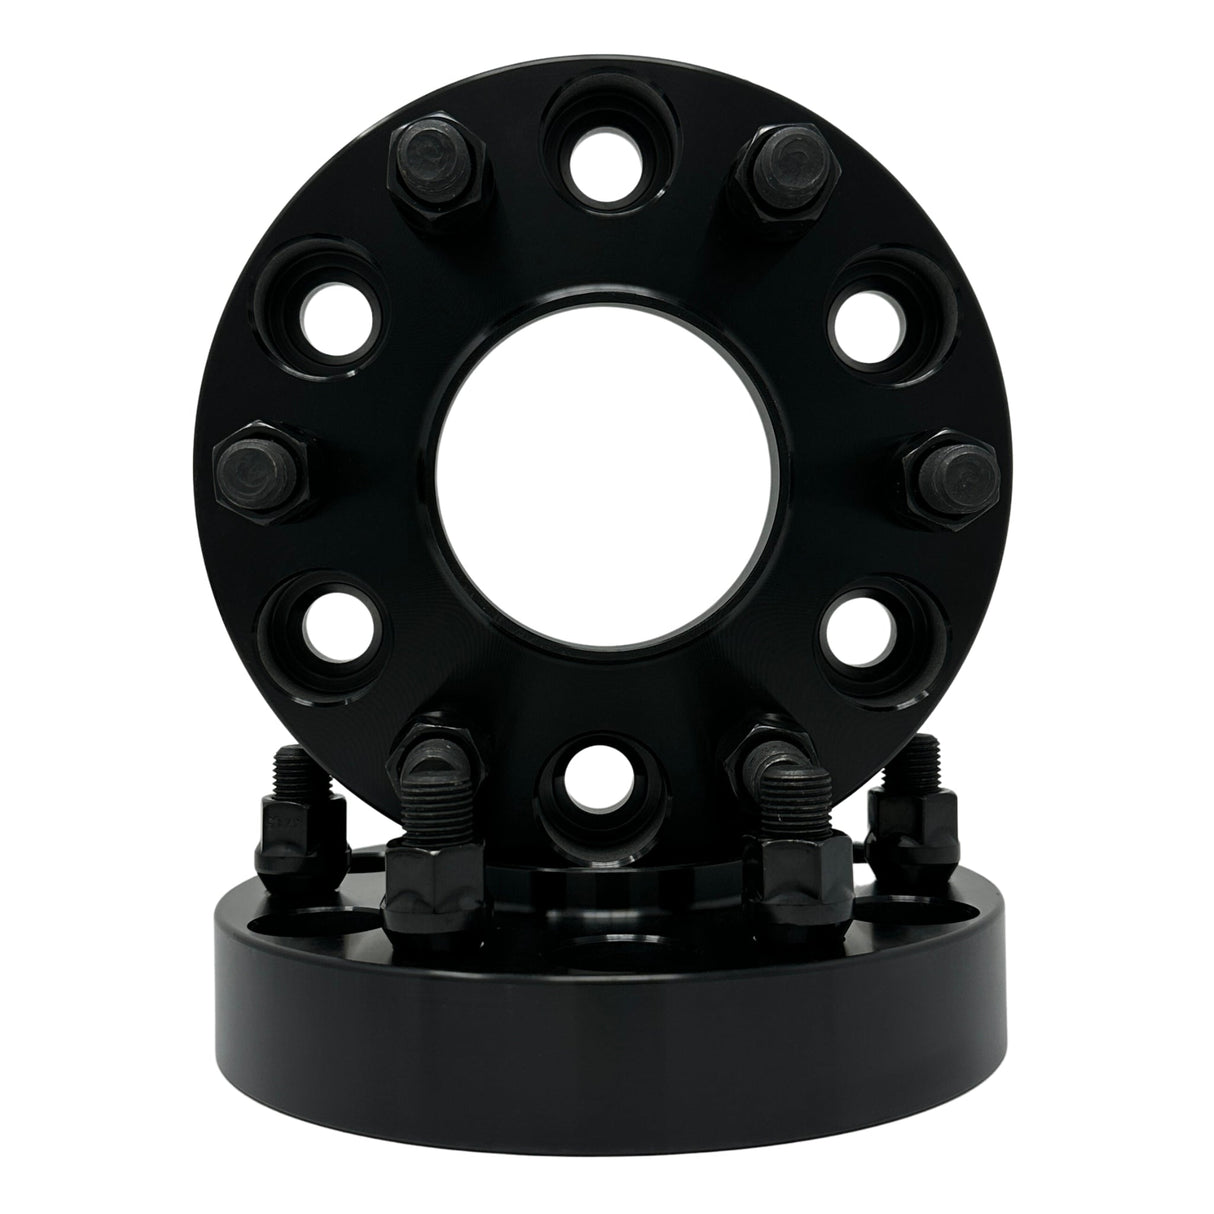 USA Made Ford 6x135 Hubcentric Wheel Spacers For 2015 & Newer Models F-150, Raptor, Expedition, Navigator 6x135 | Ford OEM 87.1mm Bore & Wheel Centering Lip | 14x1.5 Studs 3/4" Inch - 3" Inch Thicknesses